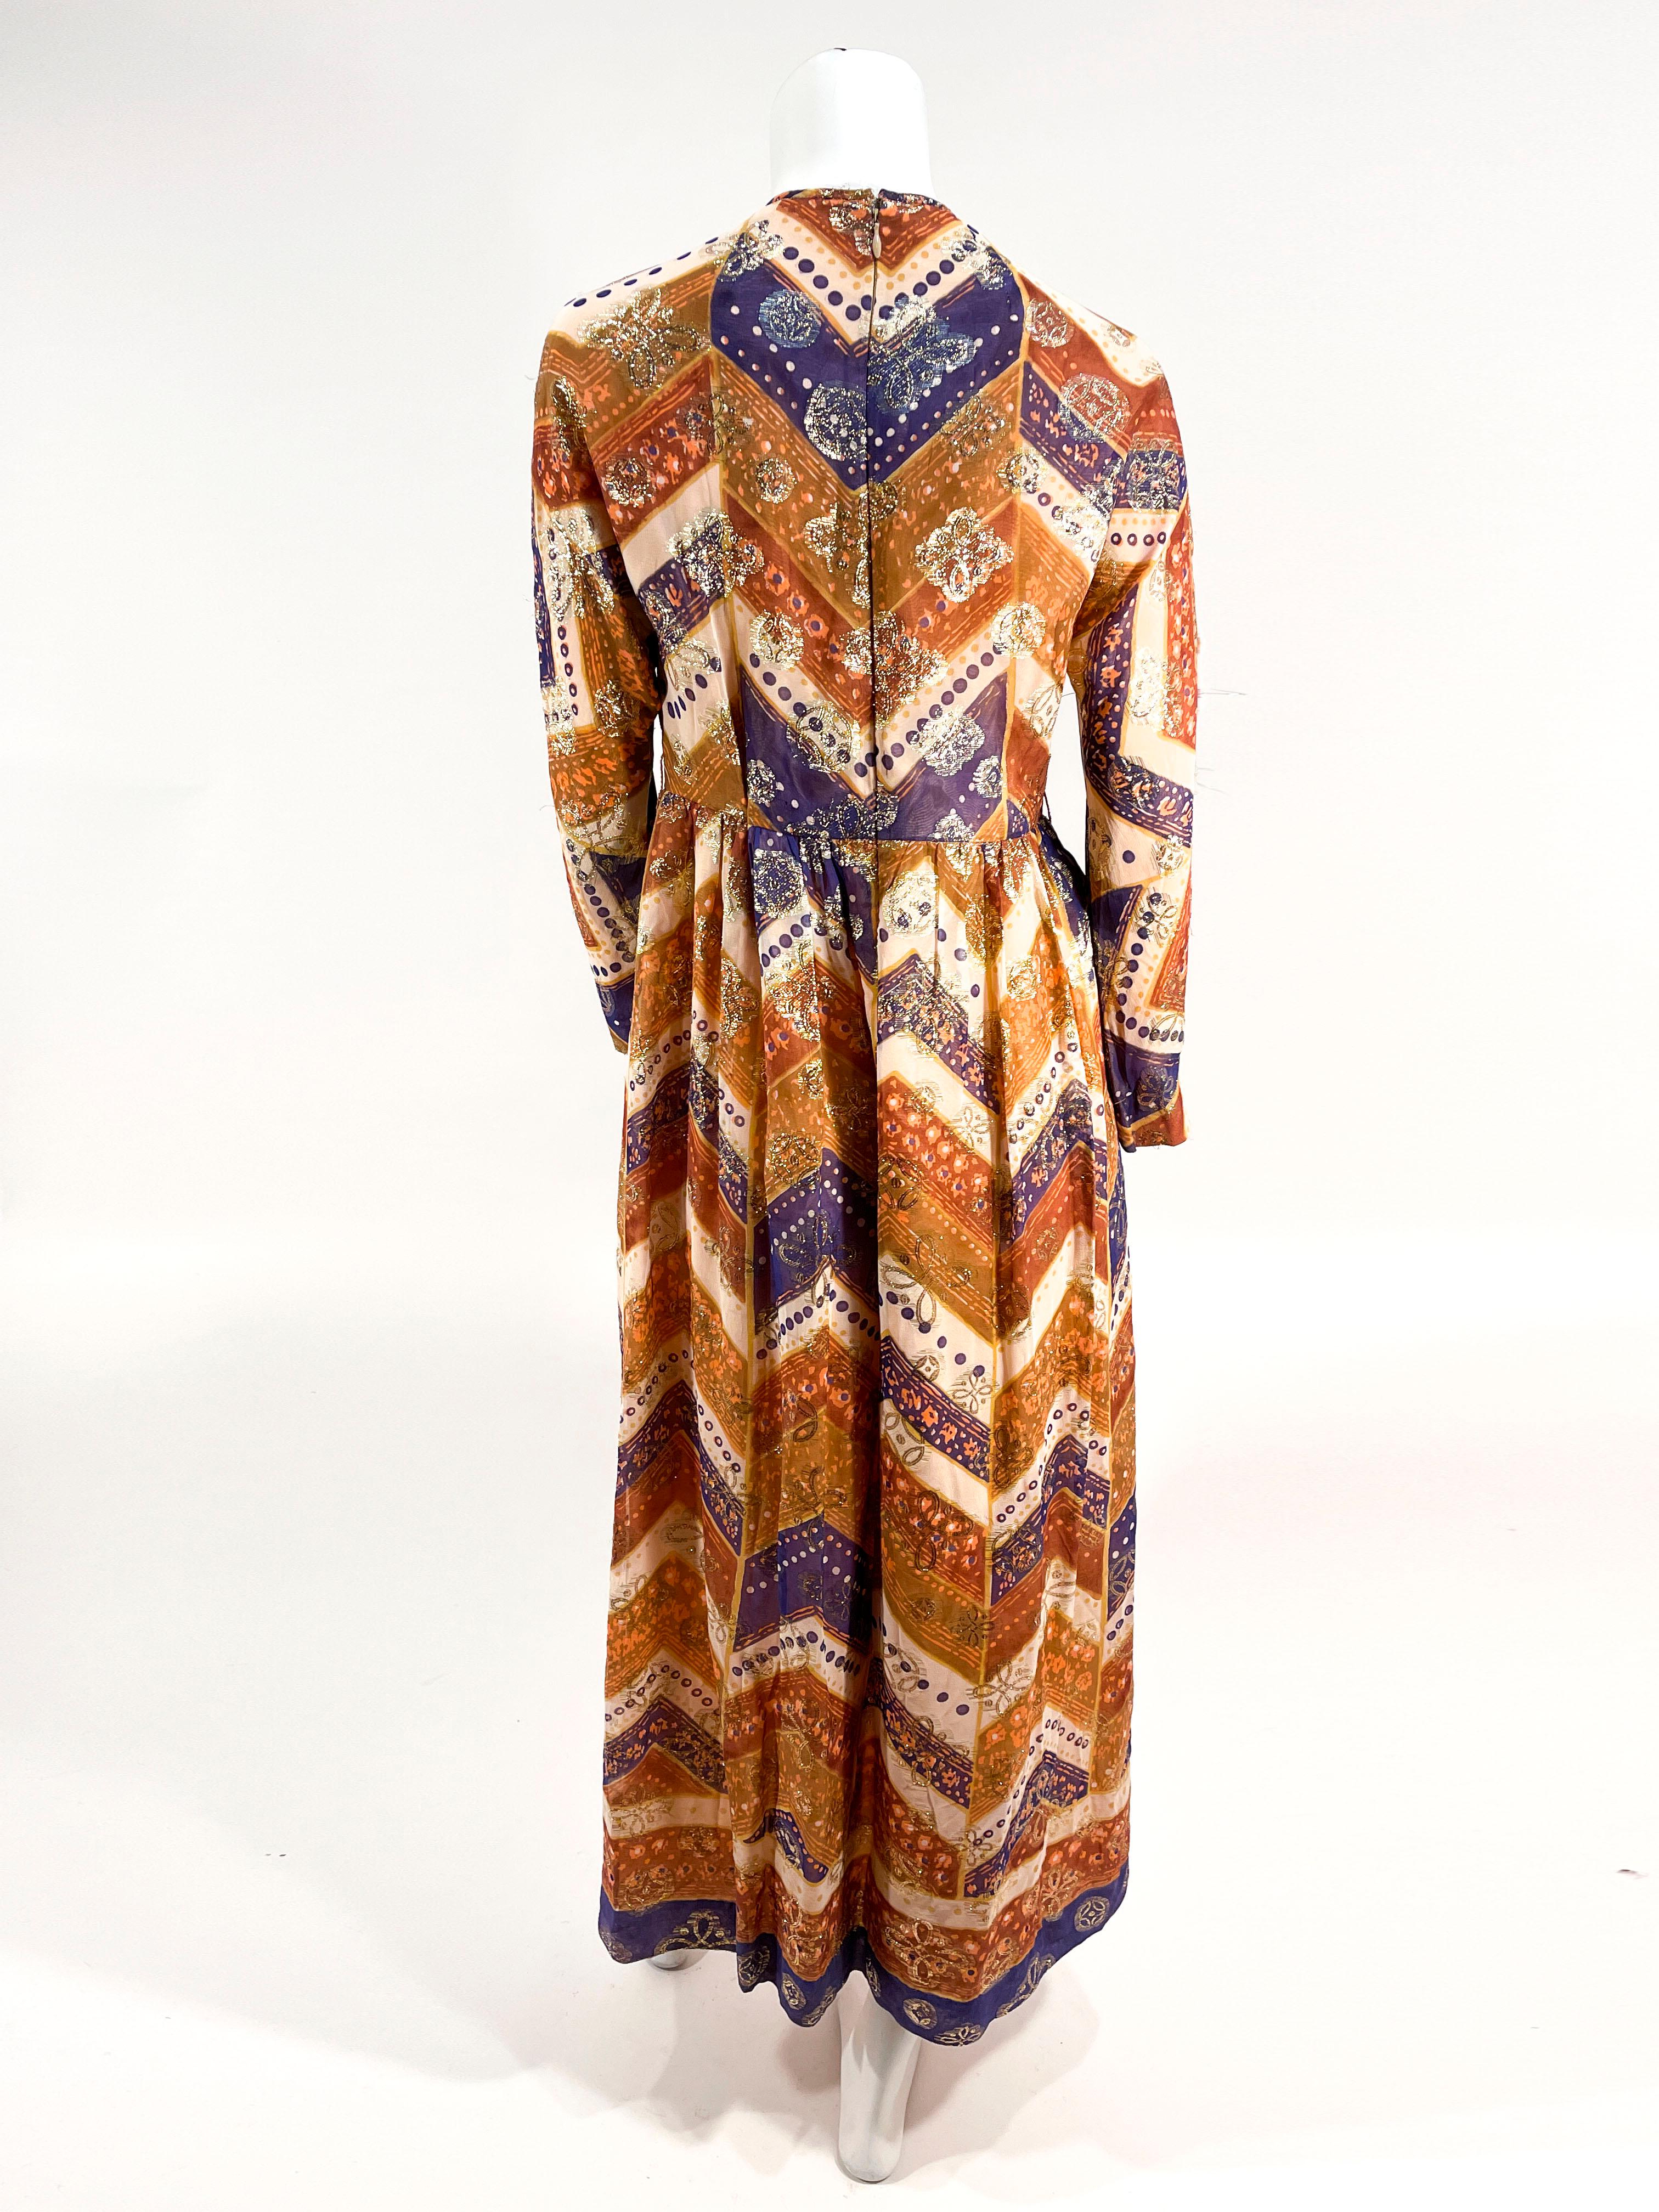 Women's 1970s Anthony Muto Chevron Printed and Metallic Dress For Sale